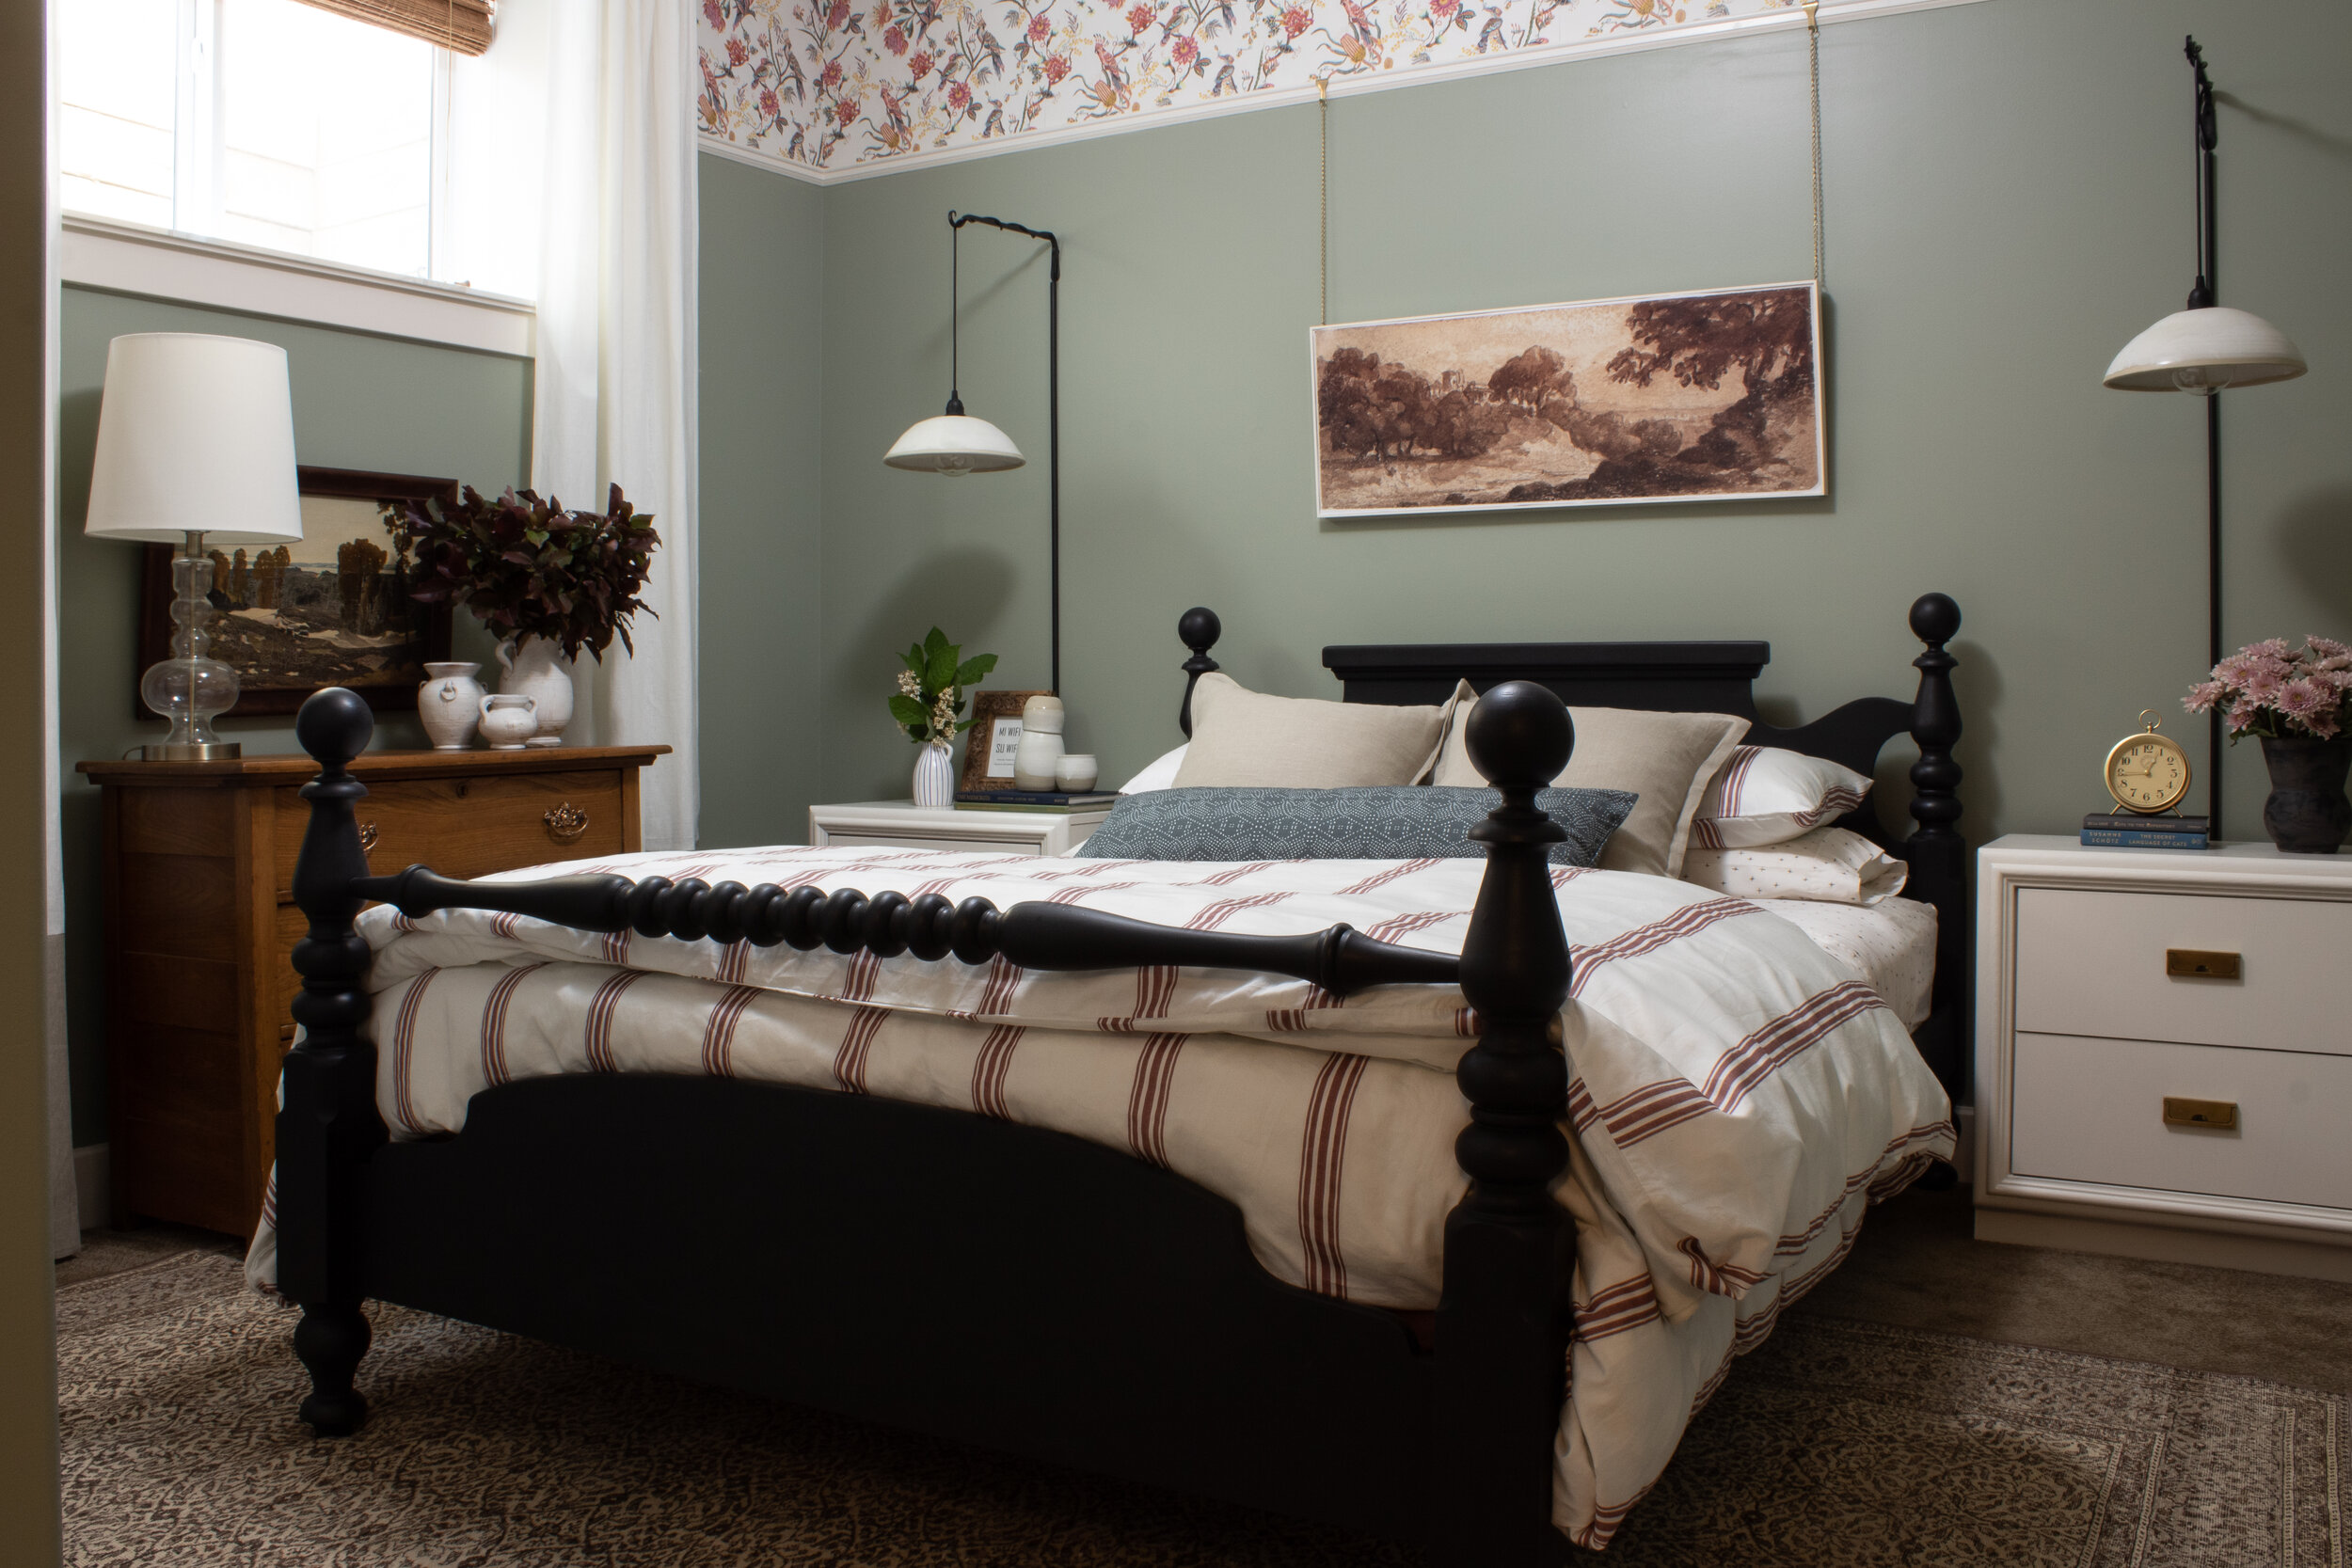 bedroom with green walls and picture rail trim with floral wallpaper above the picture rail, red striped bedding, black antique bed, white nightstands and a brown vintage rug